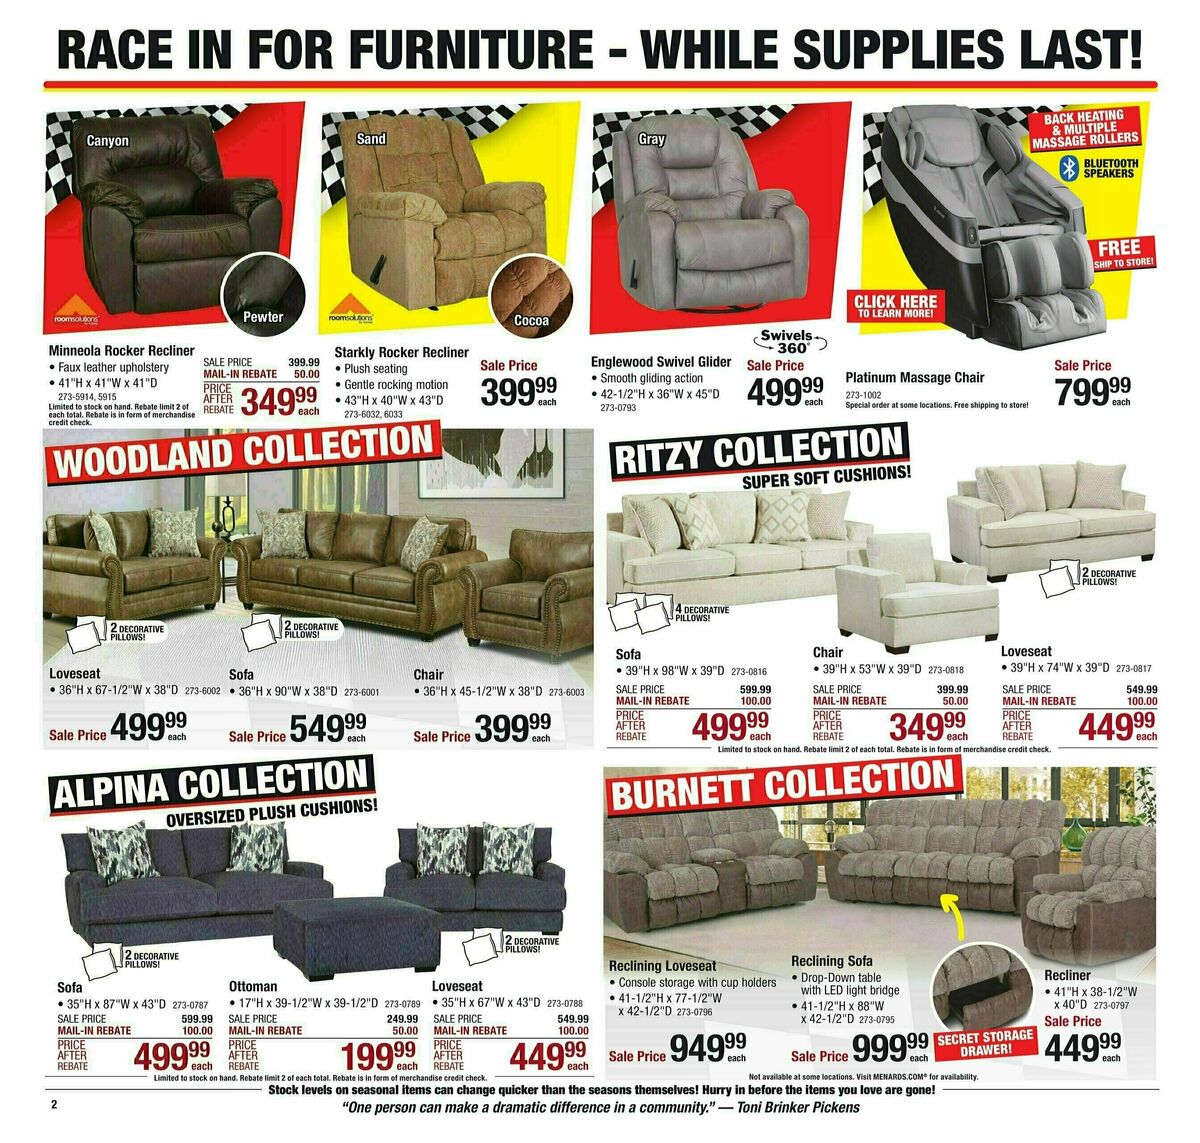 Menards Ready. Set. Save. Sale! Weekly Ad from February 7